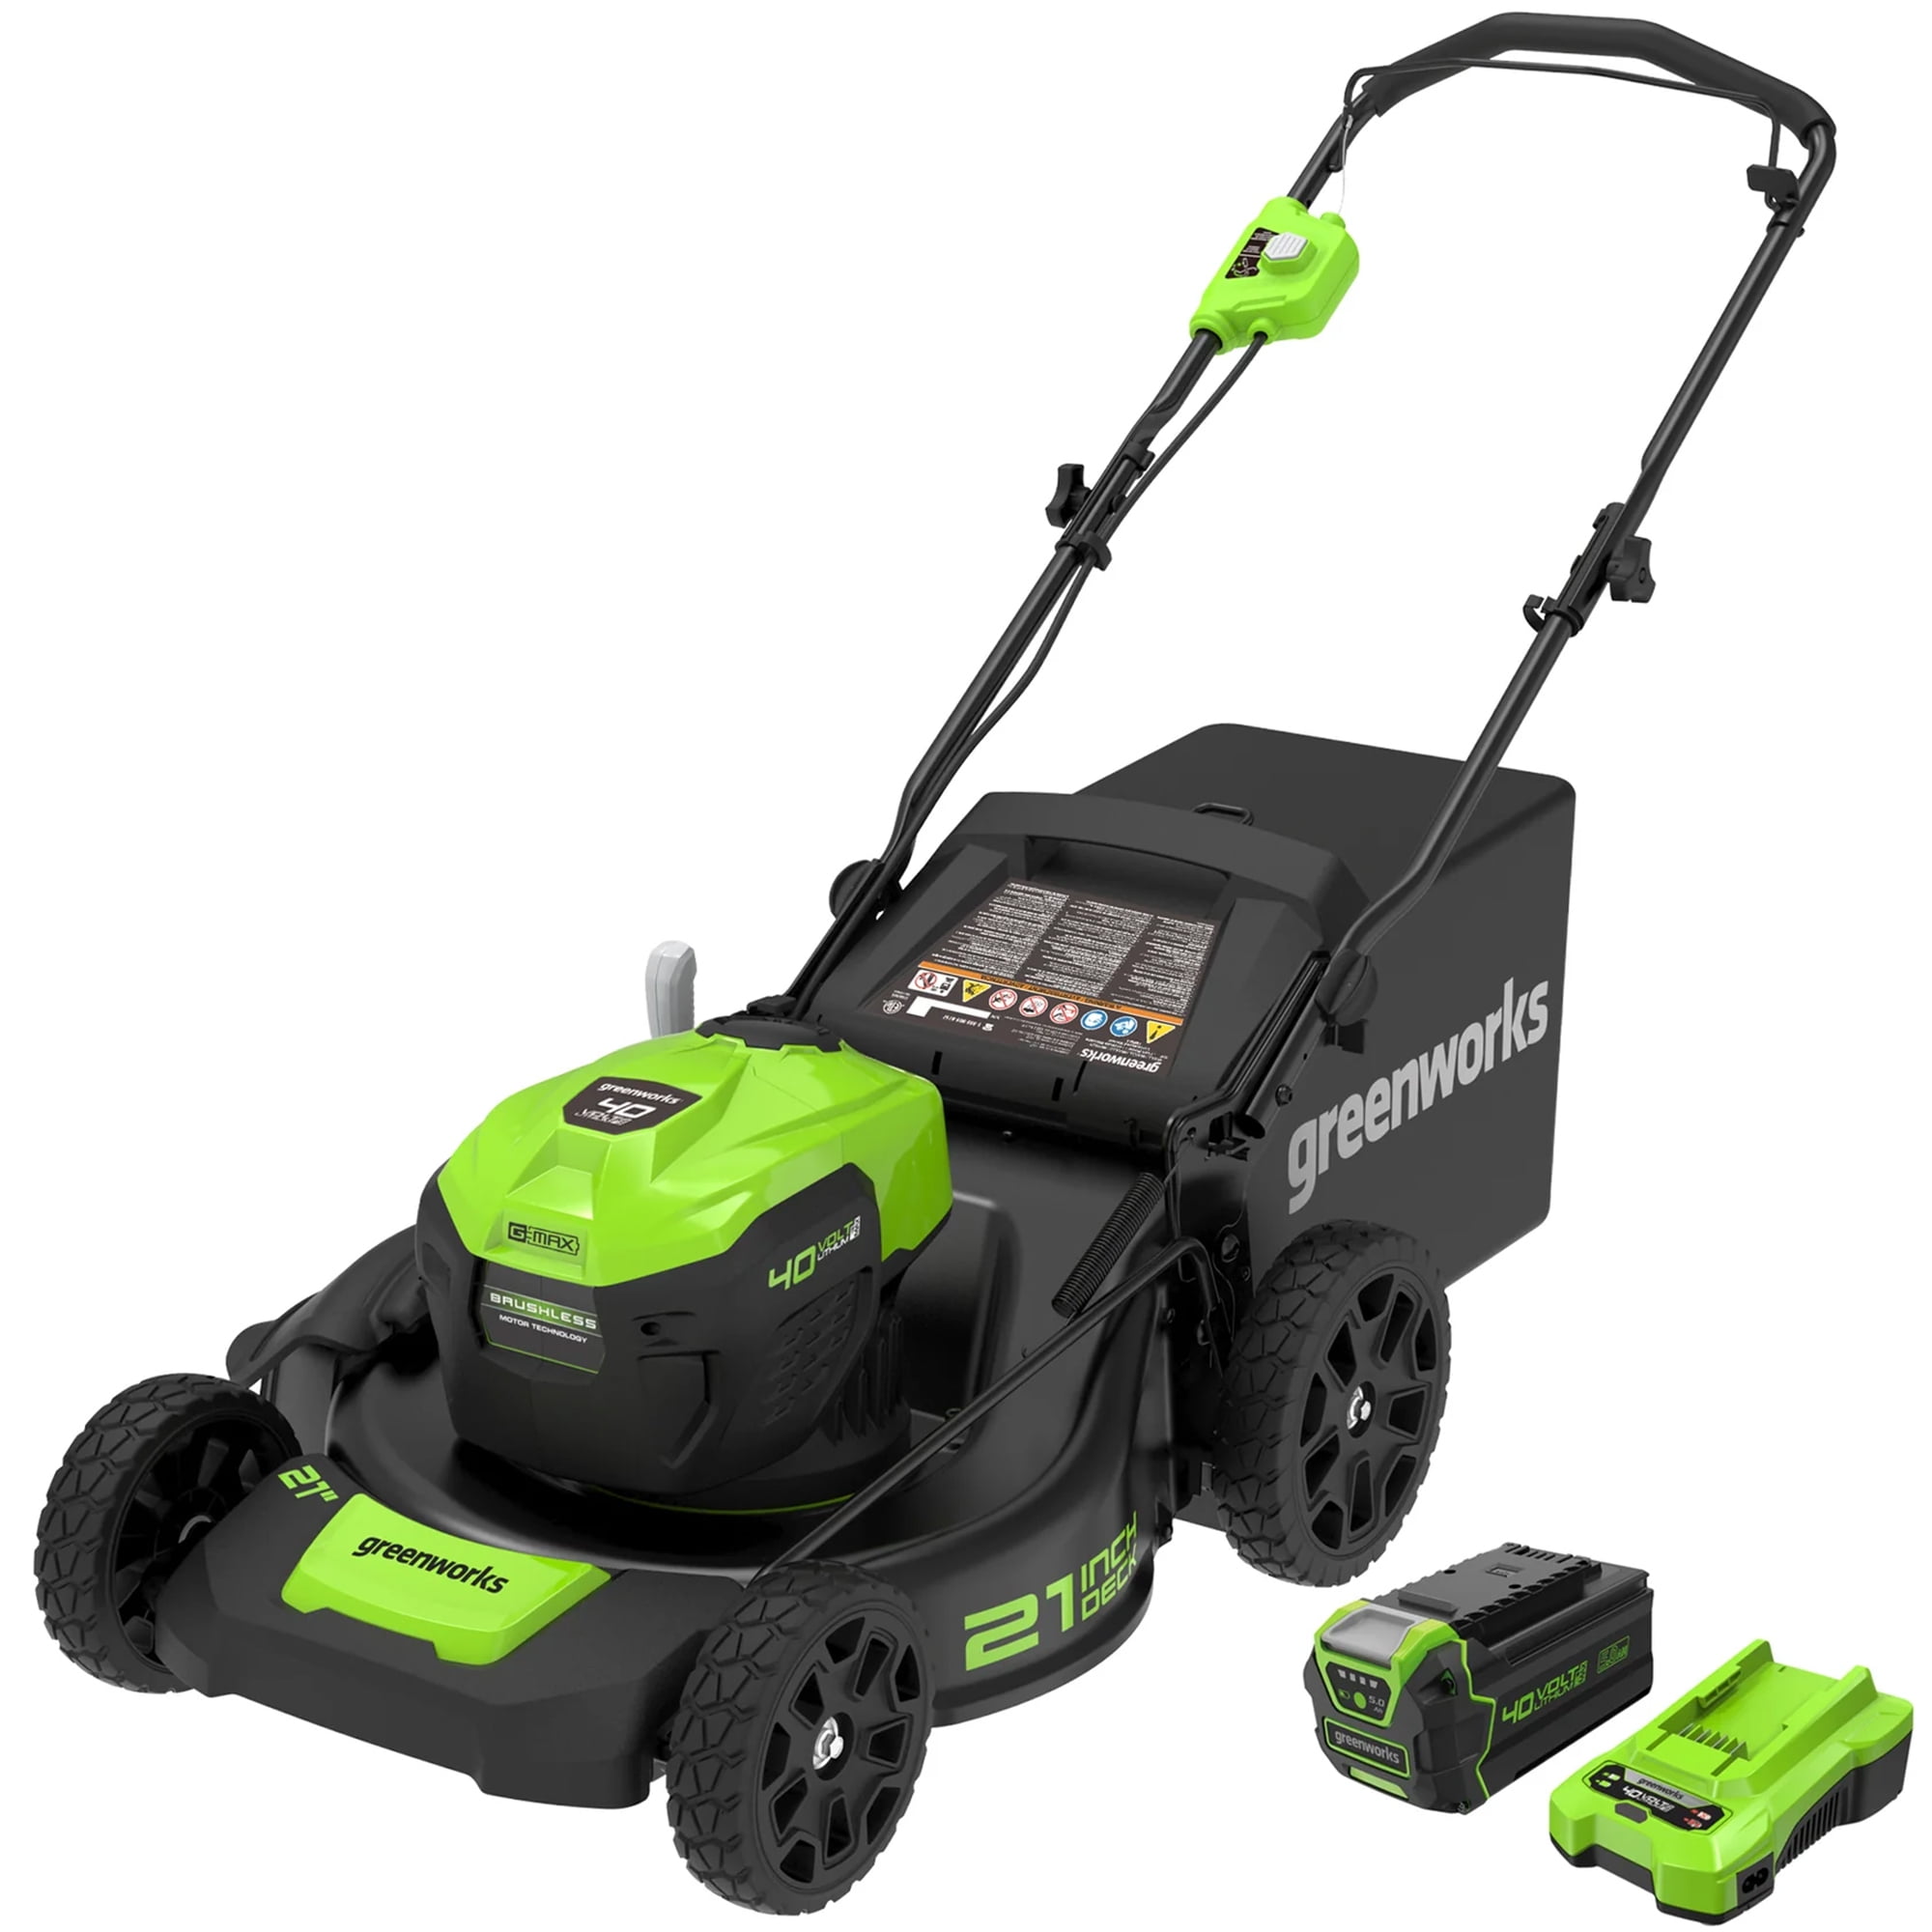 Walmart Has This Greenworks Electric Lawn Mower for 31% Off